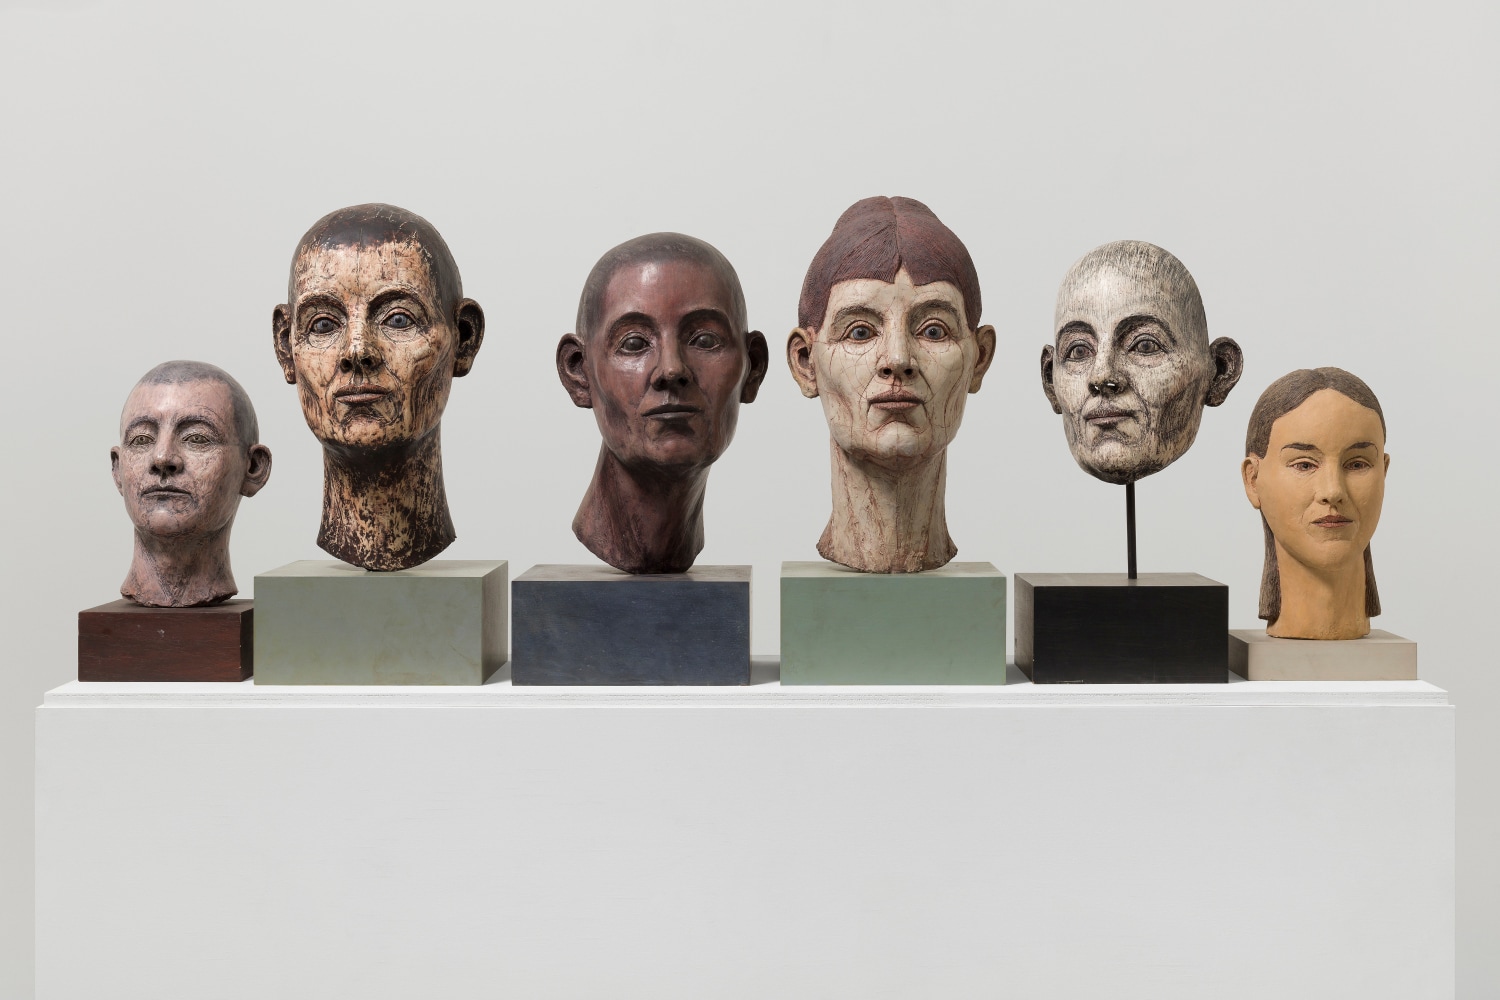 Group of six different sculptural heads ranging in size, gender and color